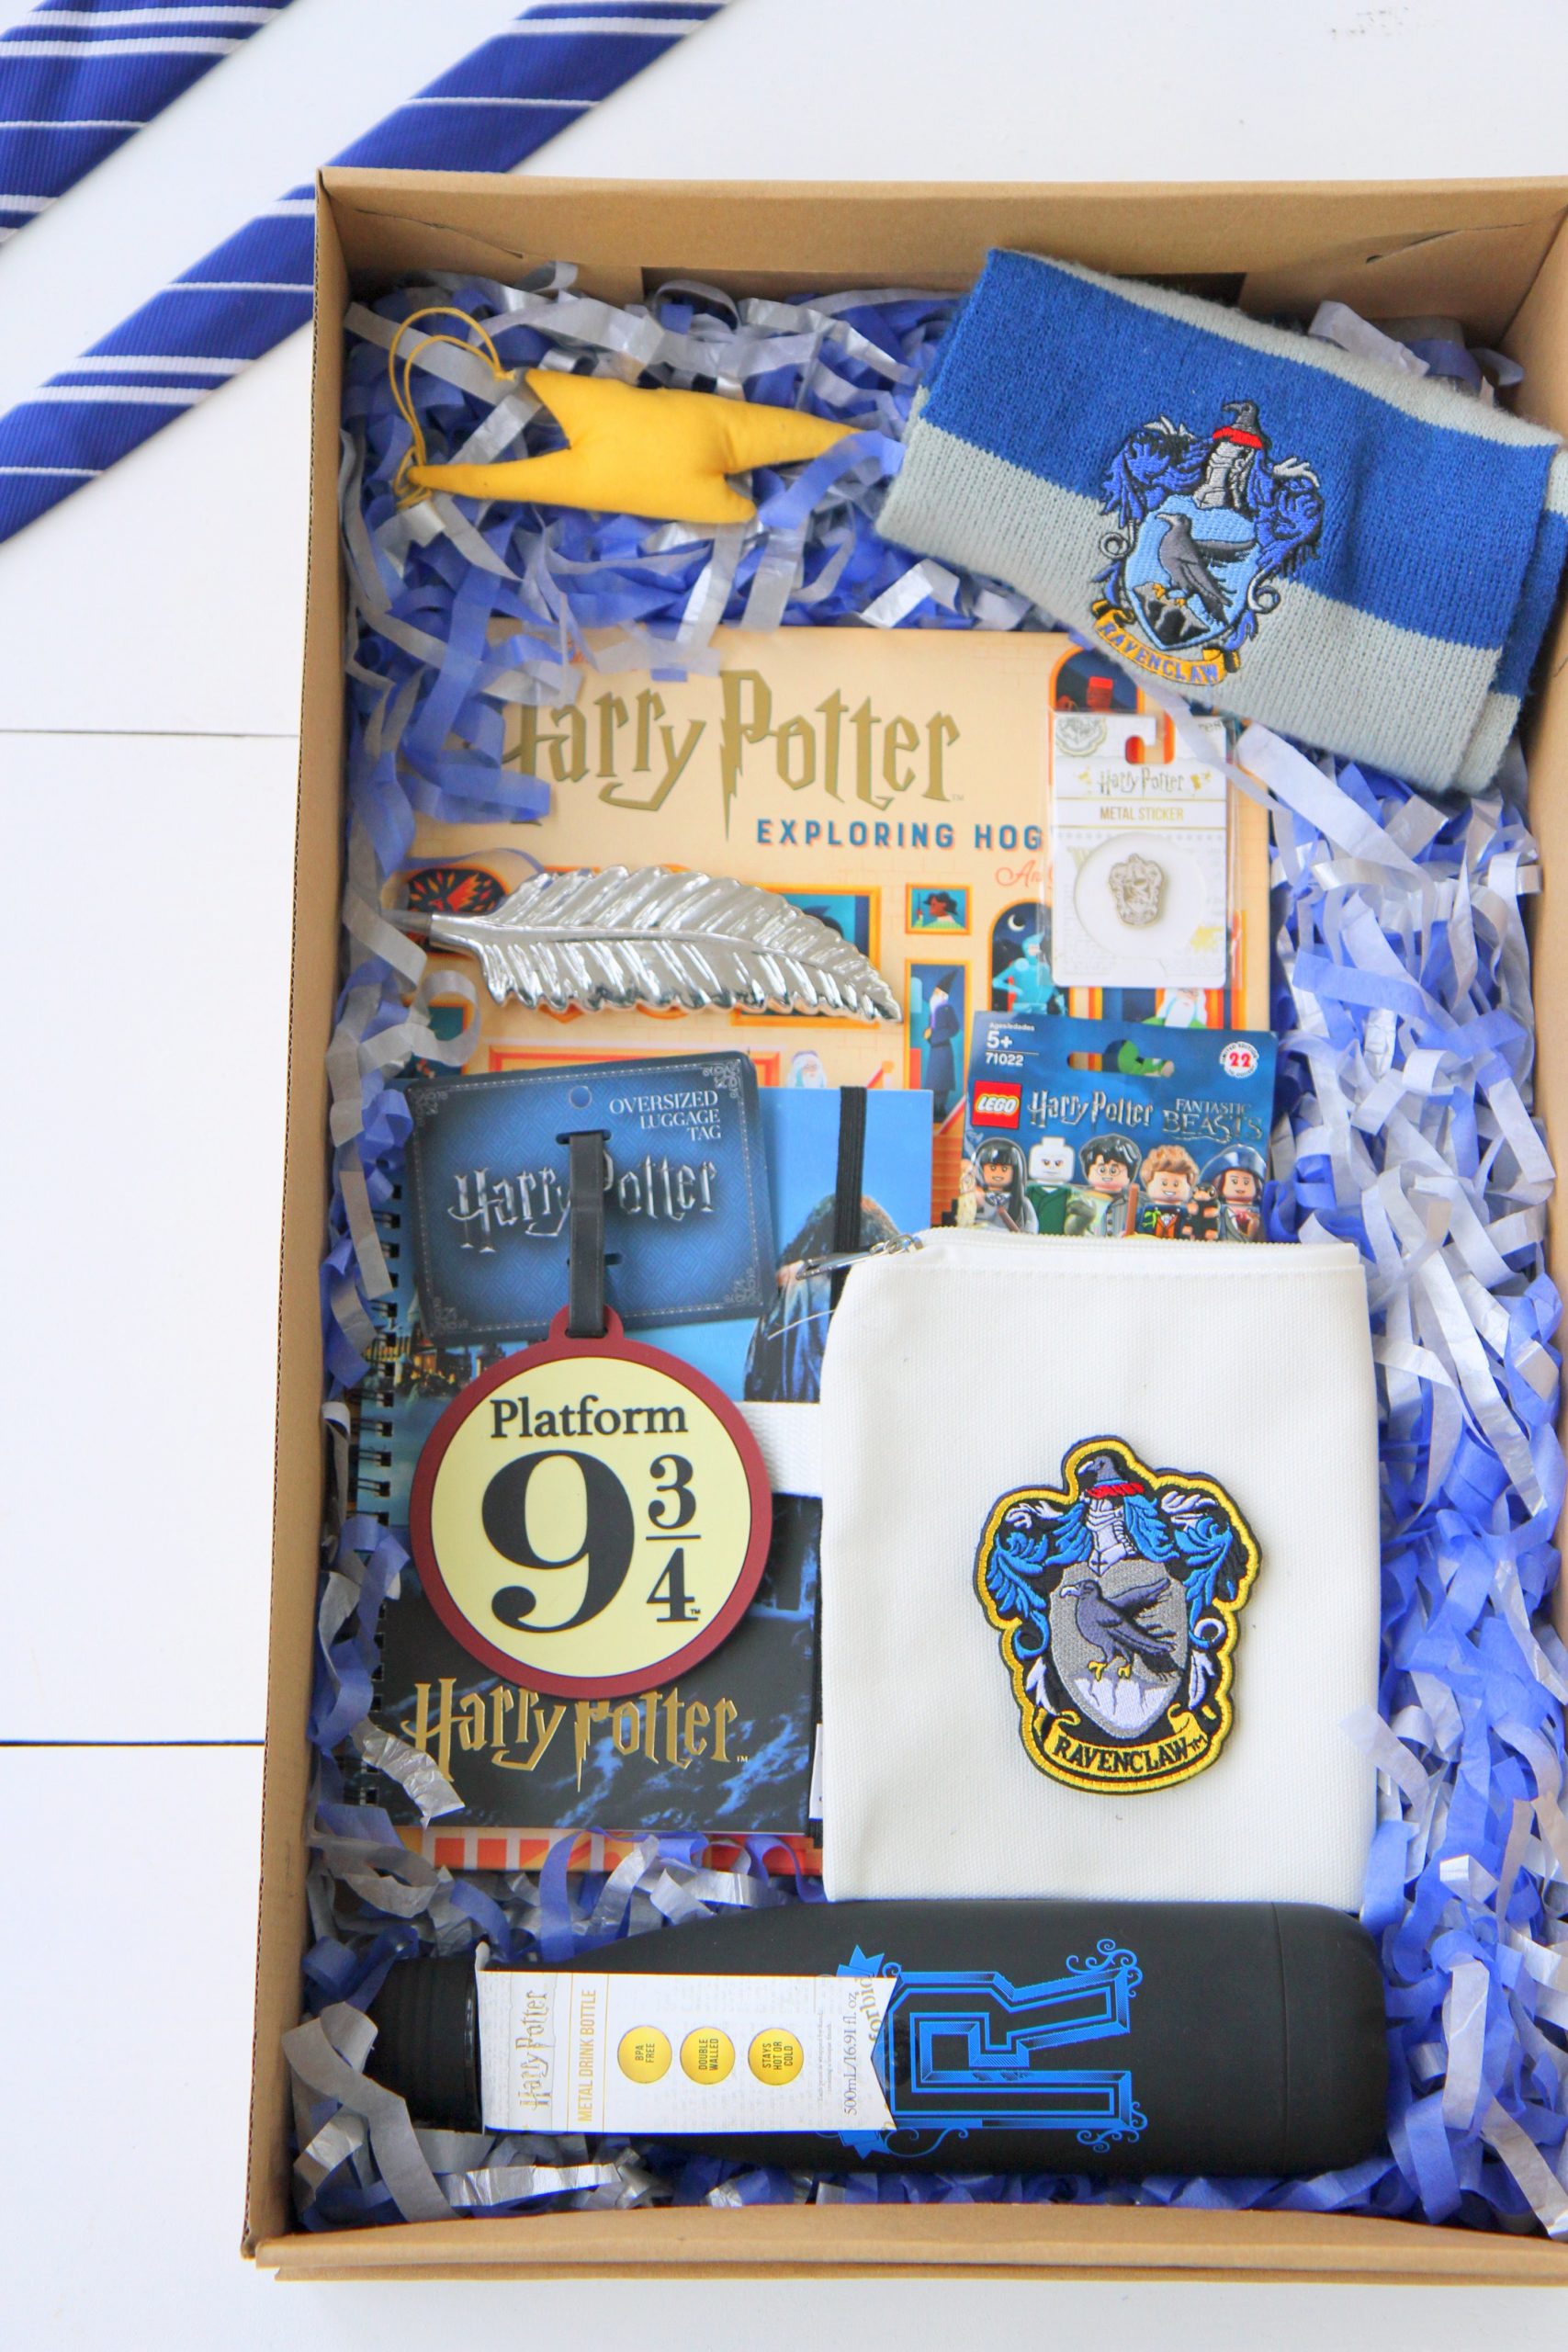 DIY harry potter gift basket (and tons of HP gift ideas)